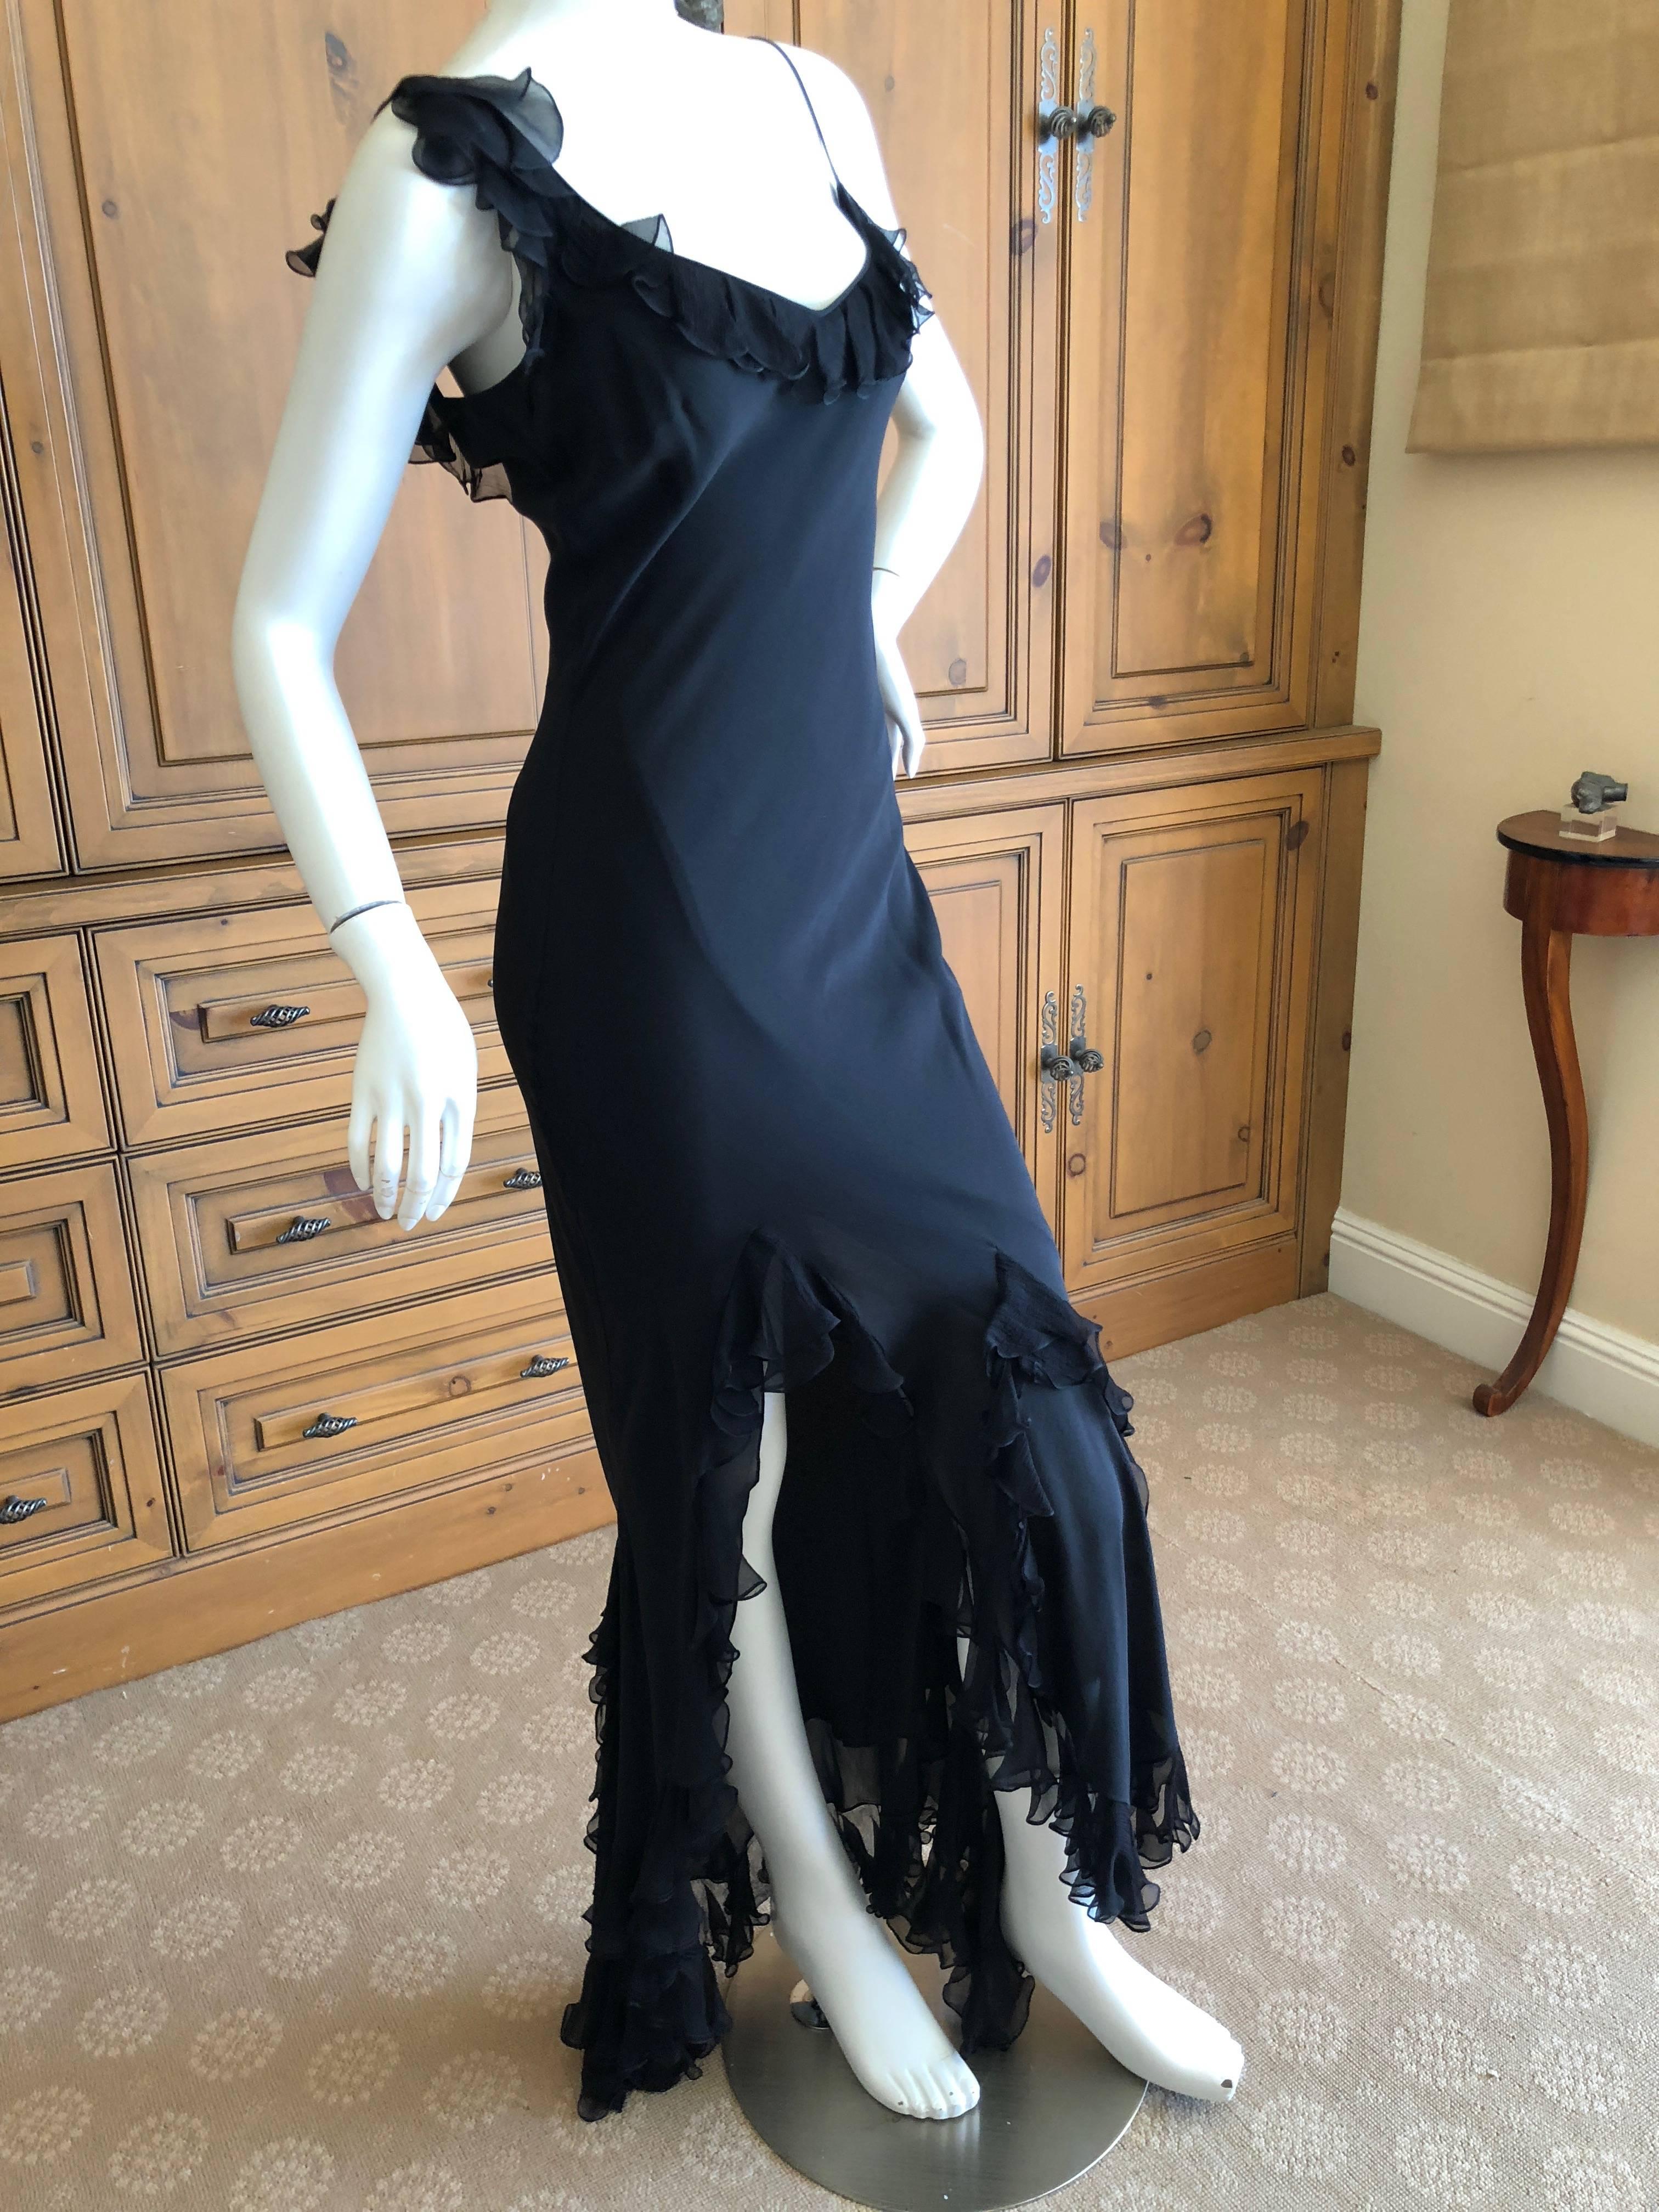 Christian Dior by John Galliano Exquisite Low Cut Silk Evening Dress . 
 Size 42 
Bust 42" 
Waist 33"
 Hips 50" 
Length 62"
 Excellent condition
